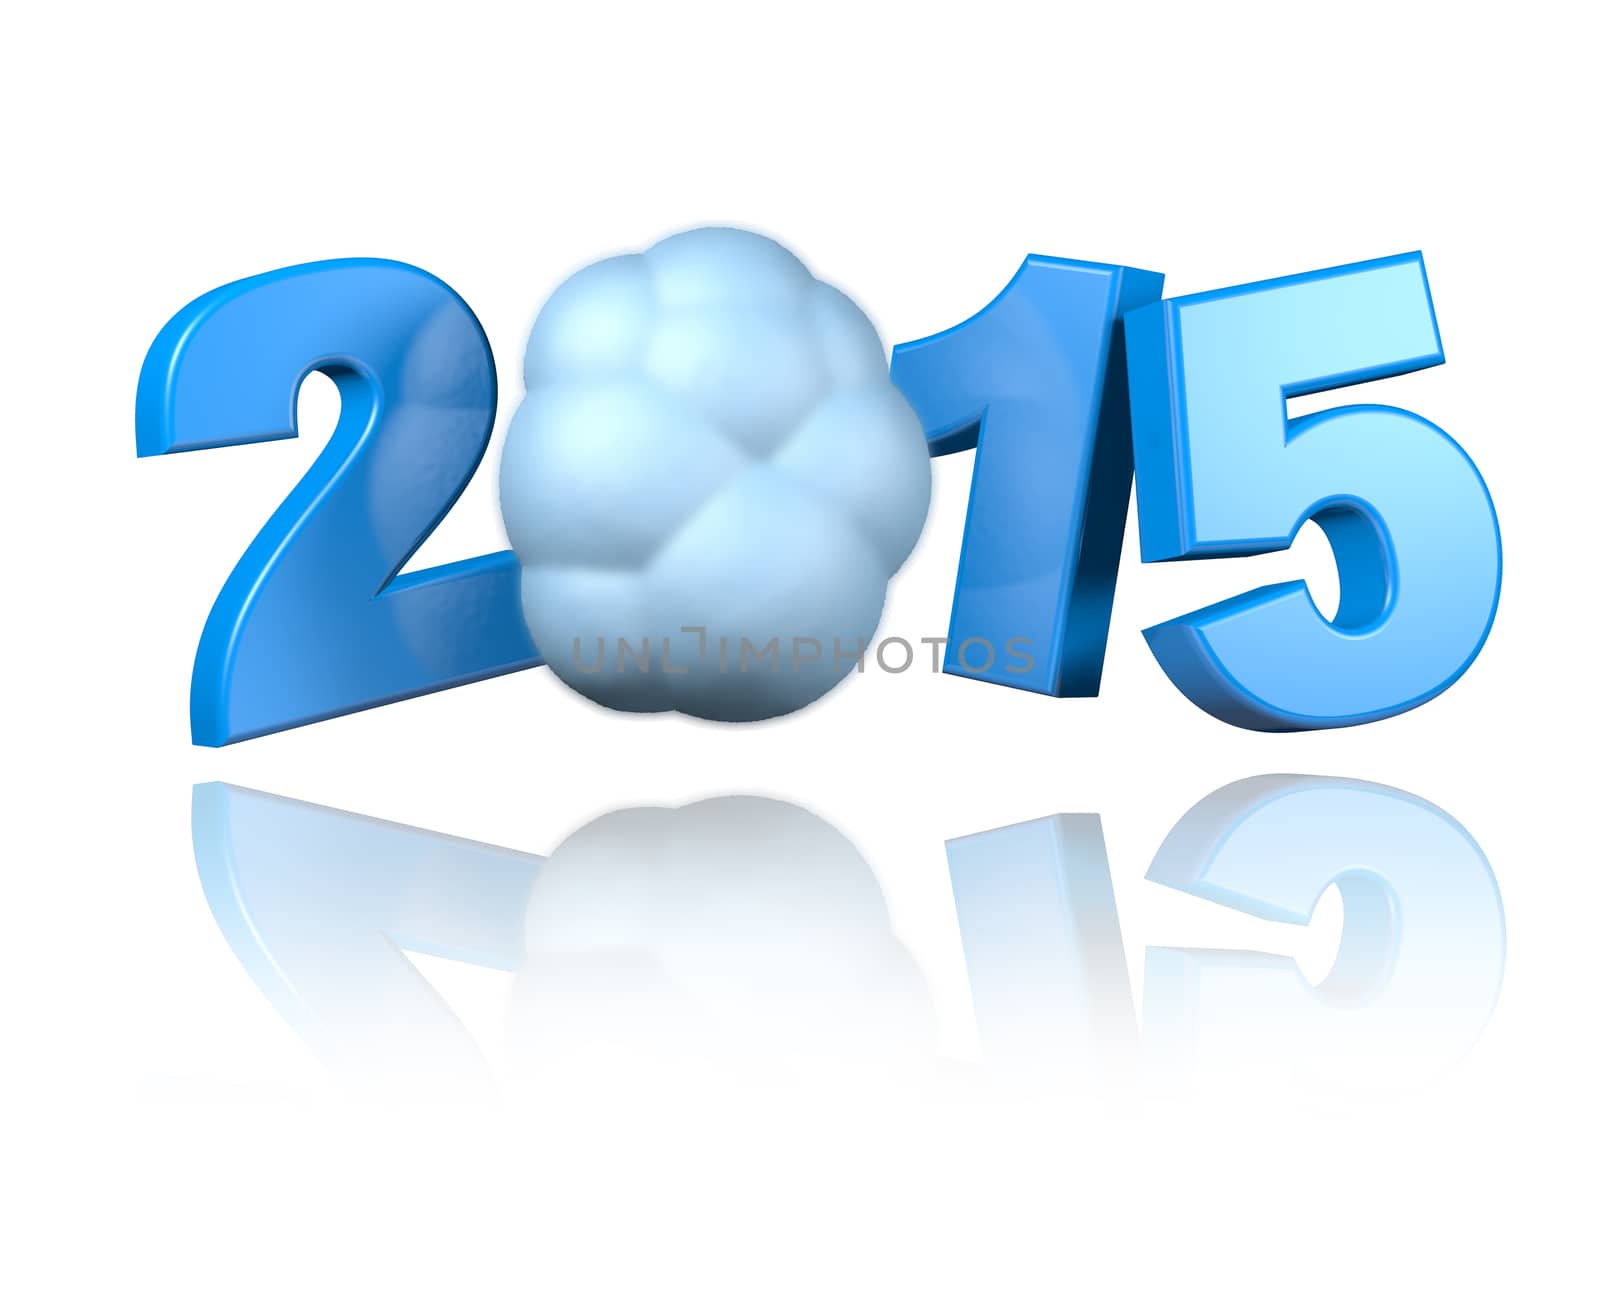 Cloud 2015 design with a White Background